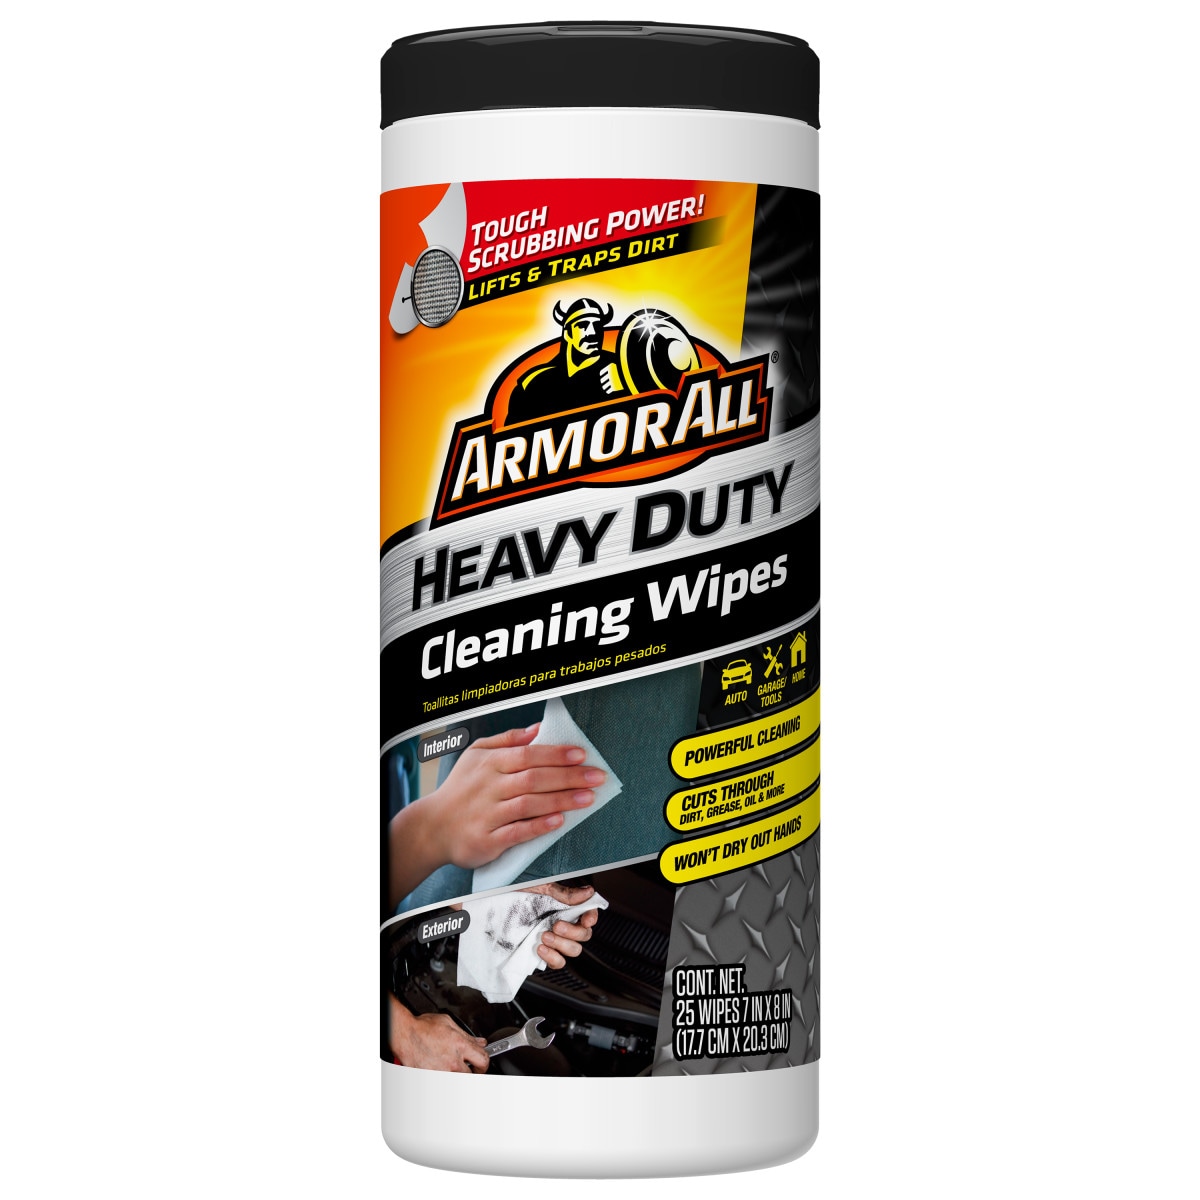 Heavy Duty Cleaning Wipes, Wet Handy Wipes, Surface Wipes, Dust Wipes